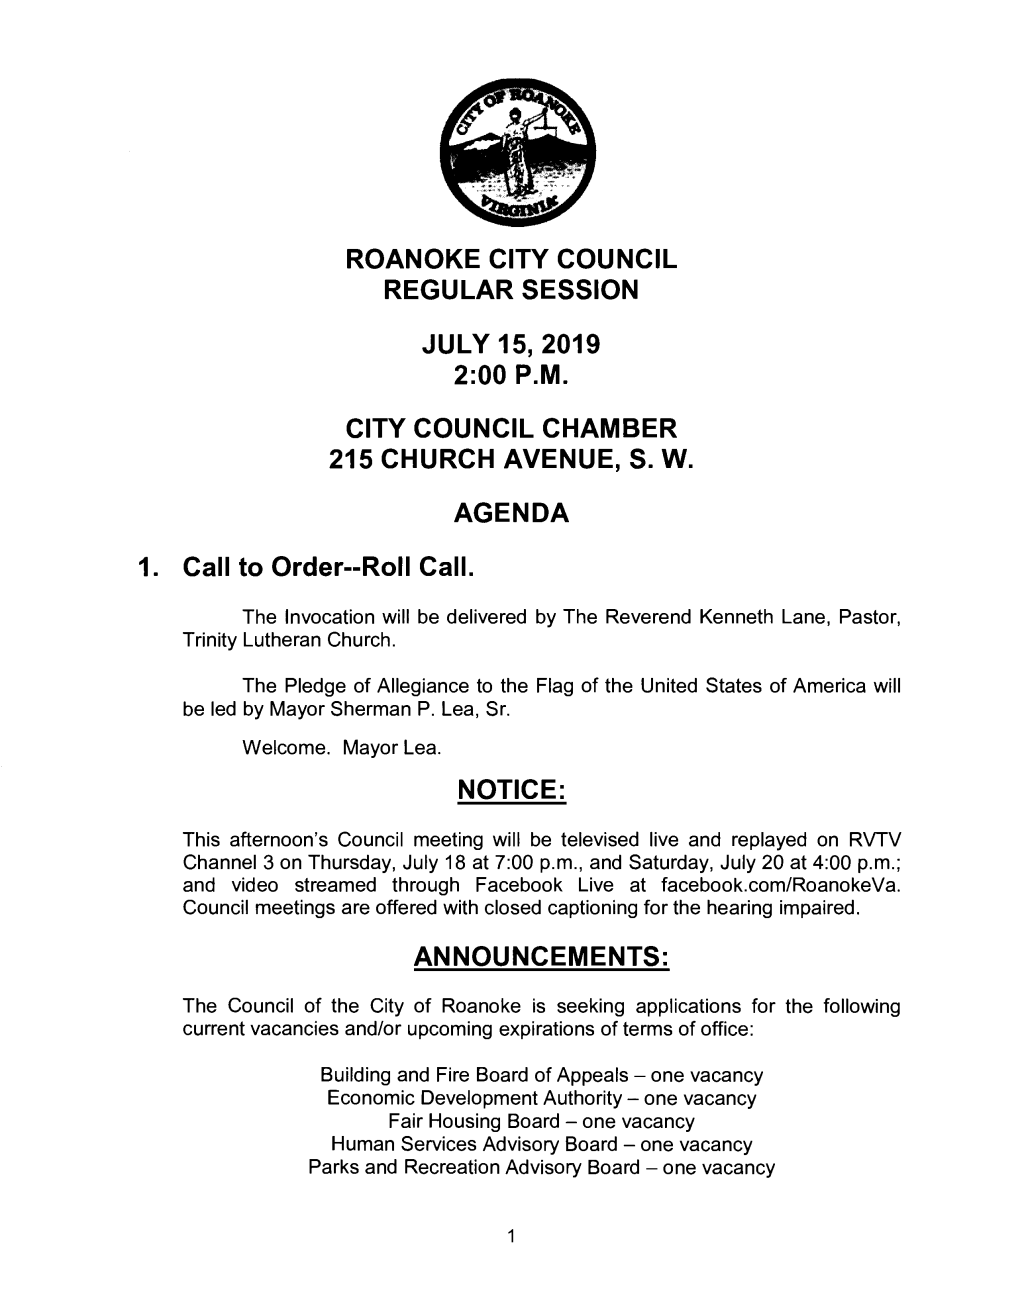 ROANOKE CITY COUNCIL REGULAR SESSION JULY 15, 2019 2:00P.M. CITY COUNCIL CHAMBER 215 CHURCH AVENUE, S. W. AGENDA 1. Call to Orde